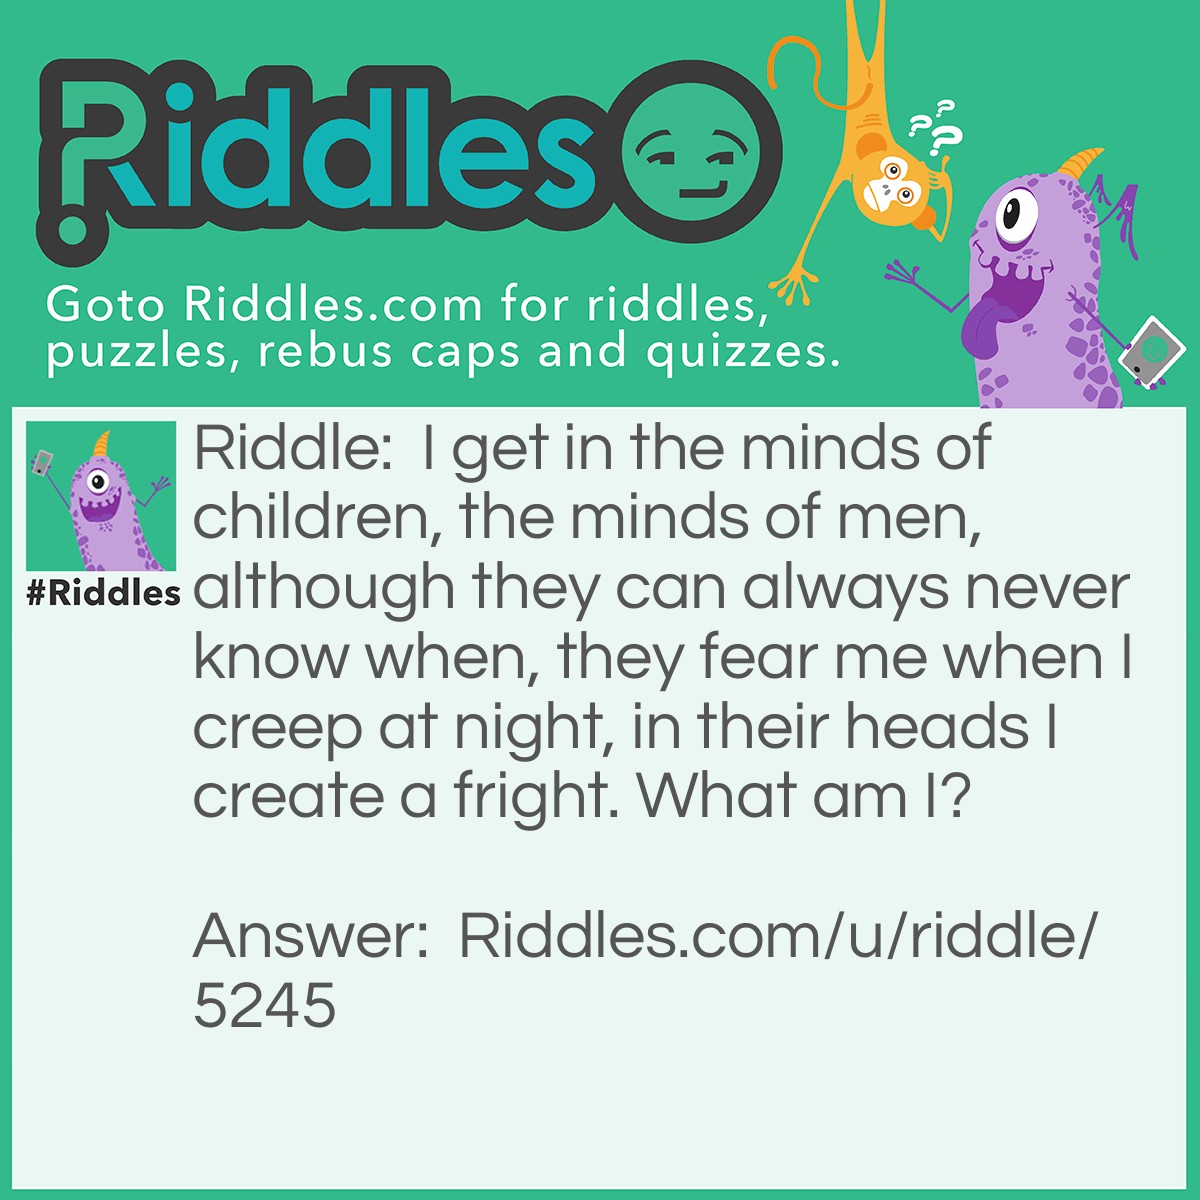 Riddle: I get in the minds of children, the minds of men, although they can always never know when, they fear me when I creep at night, in their heads I create a fright. What am I? Answer: A nightmare. We all have one sometimes.